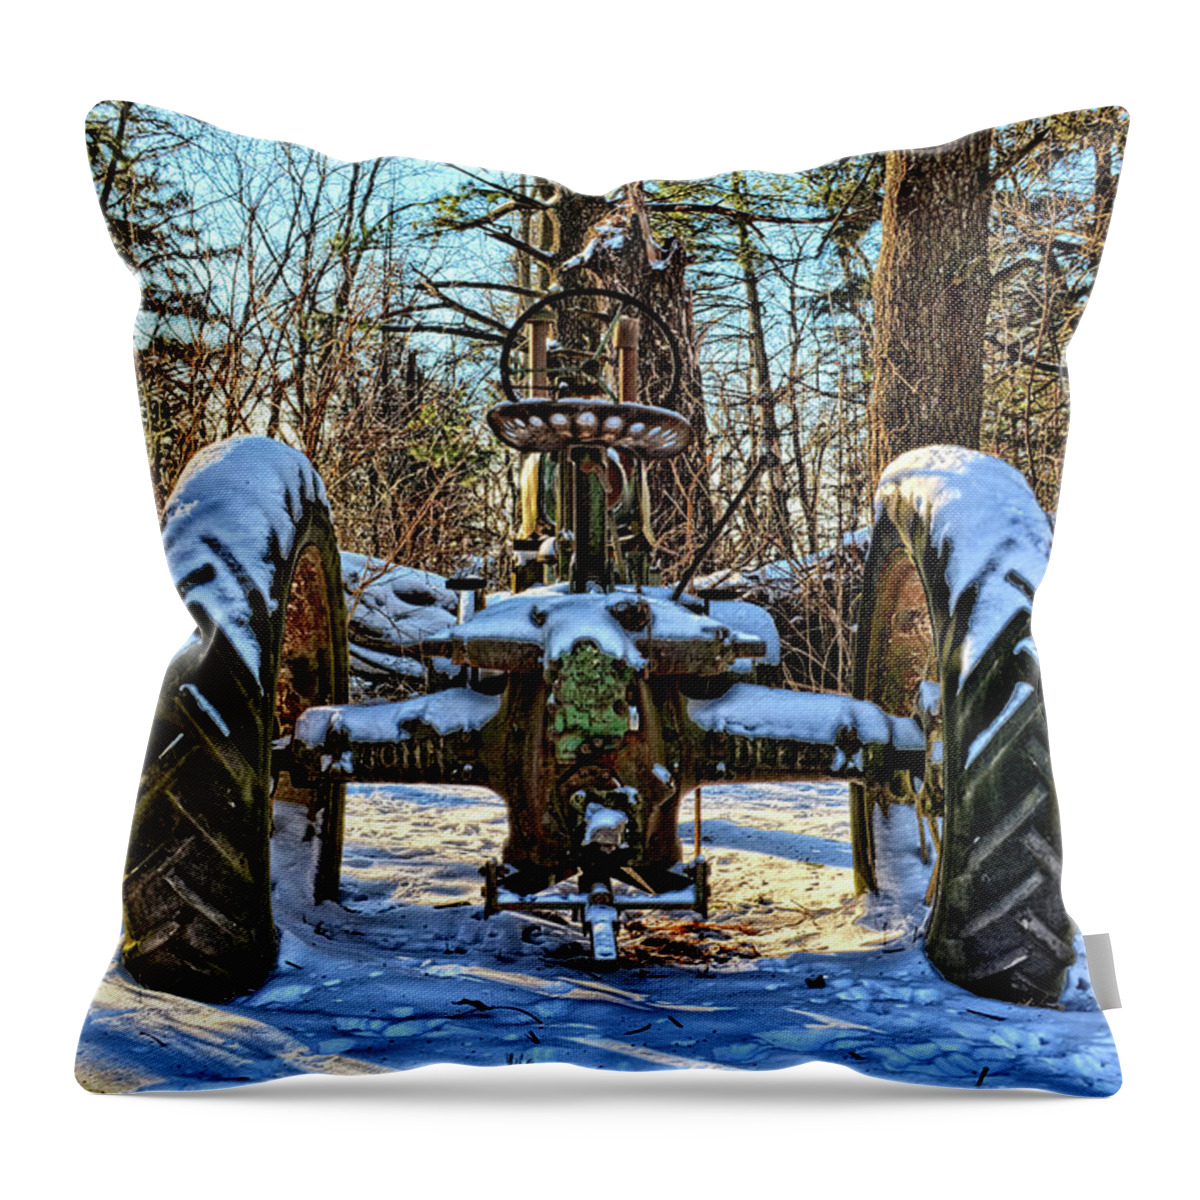 Tractor Throw Pillow featuring the photograph Winter Rest by Bonfire Photography